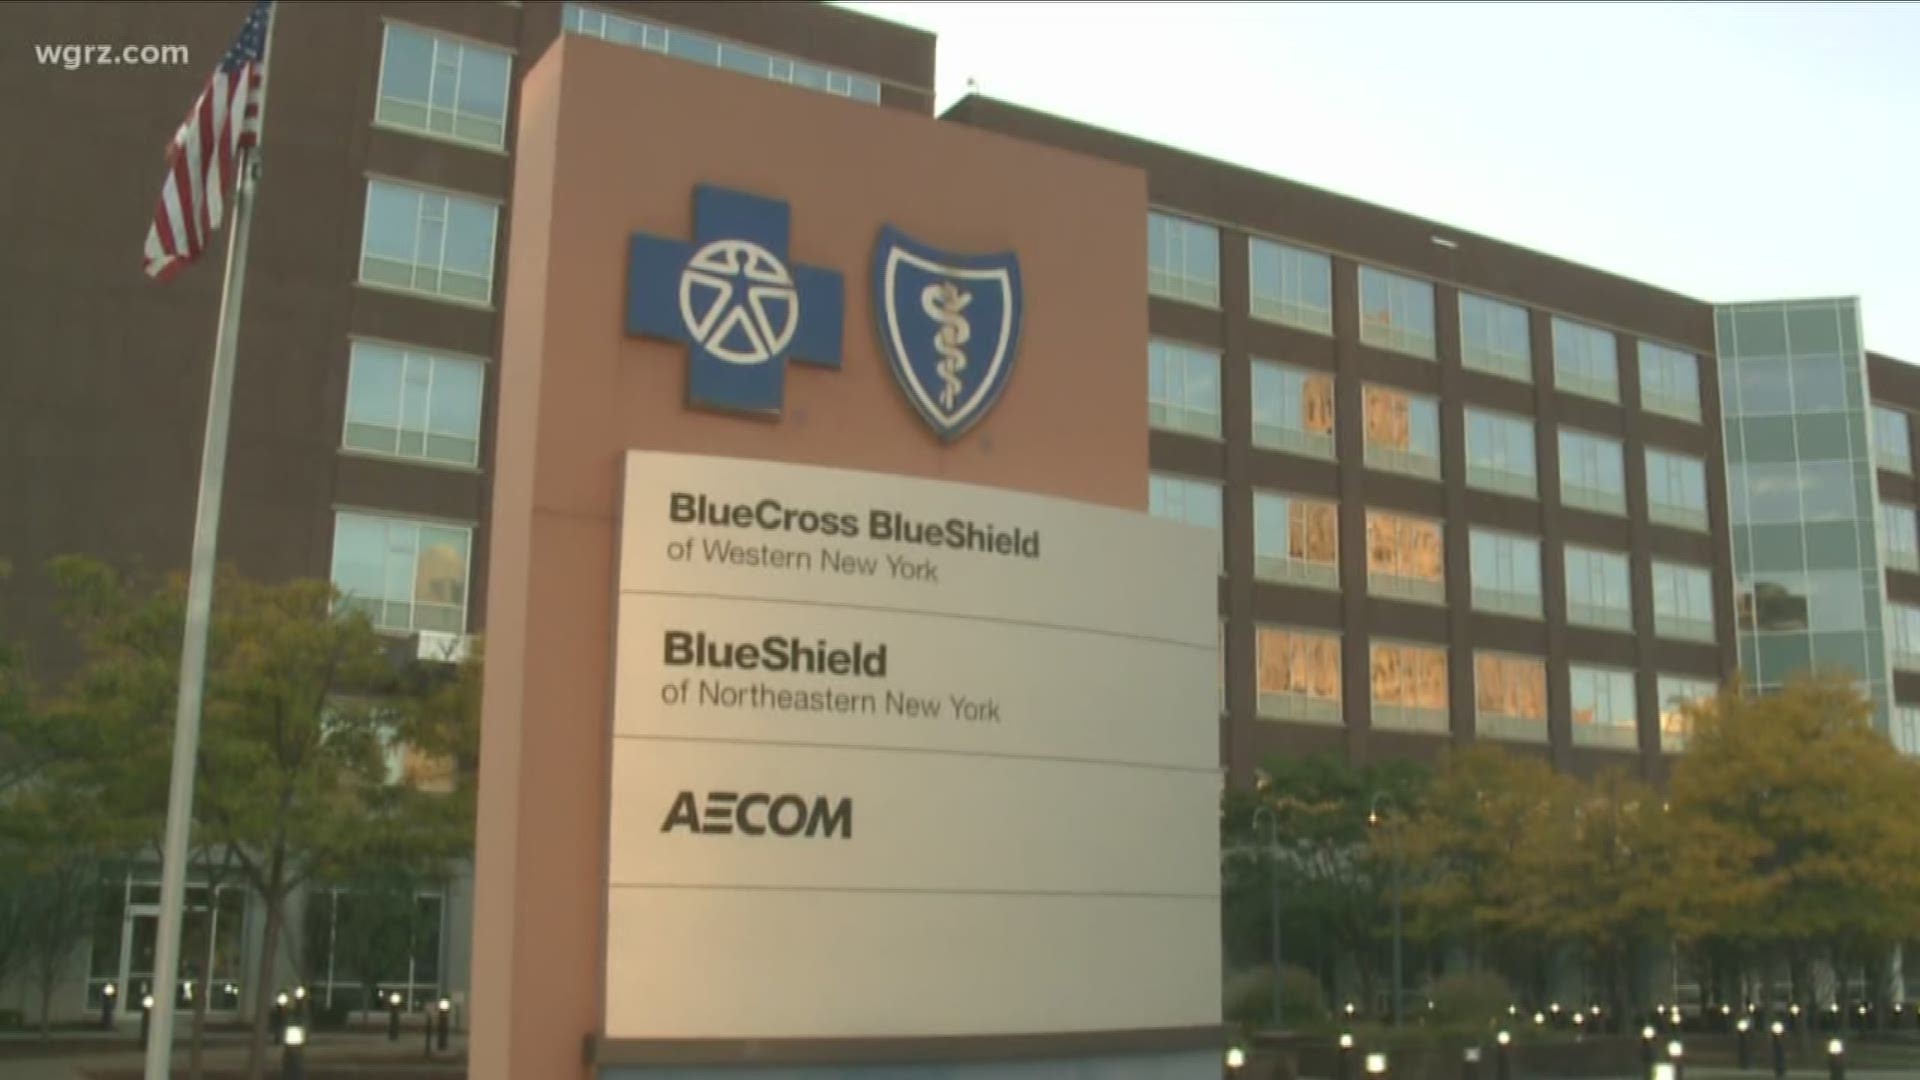 HealthNow New York which is the parent company for Blue cross Blue shield is accused of overcharging school districts as much as 85 million dollars.